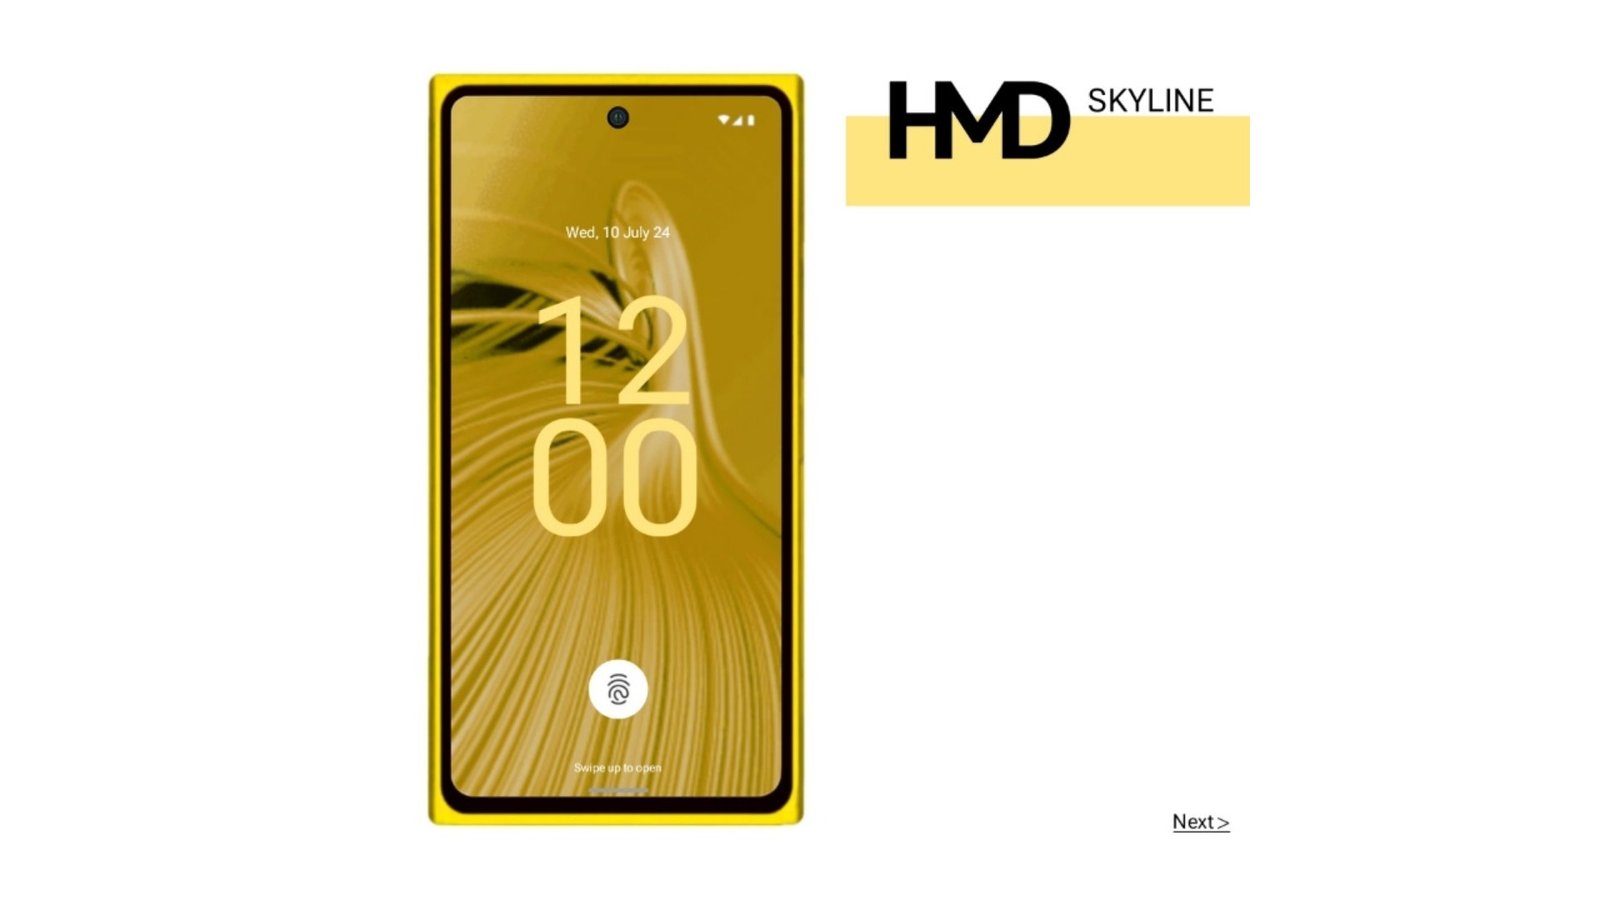 HMD leak reveals Nokia Lumia-inspired Skyline and other upcoming models